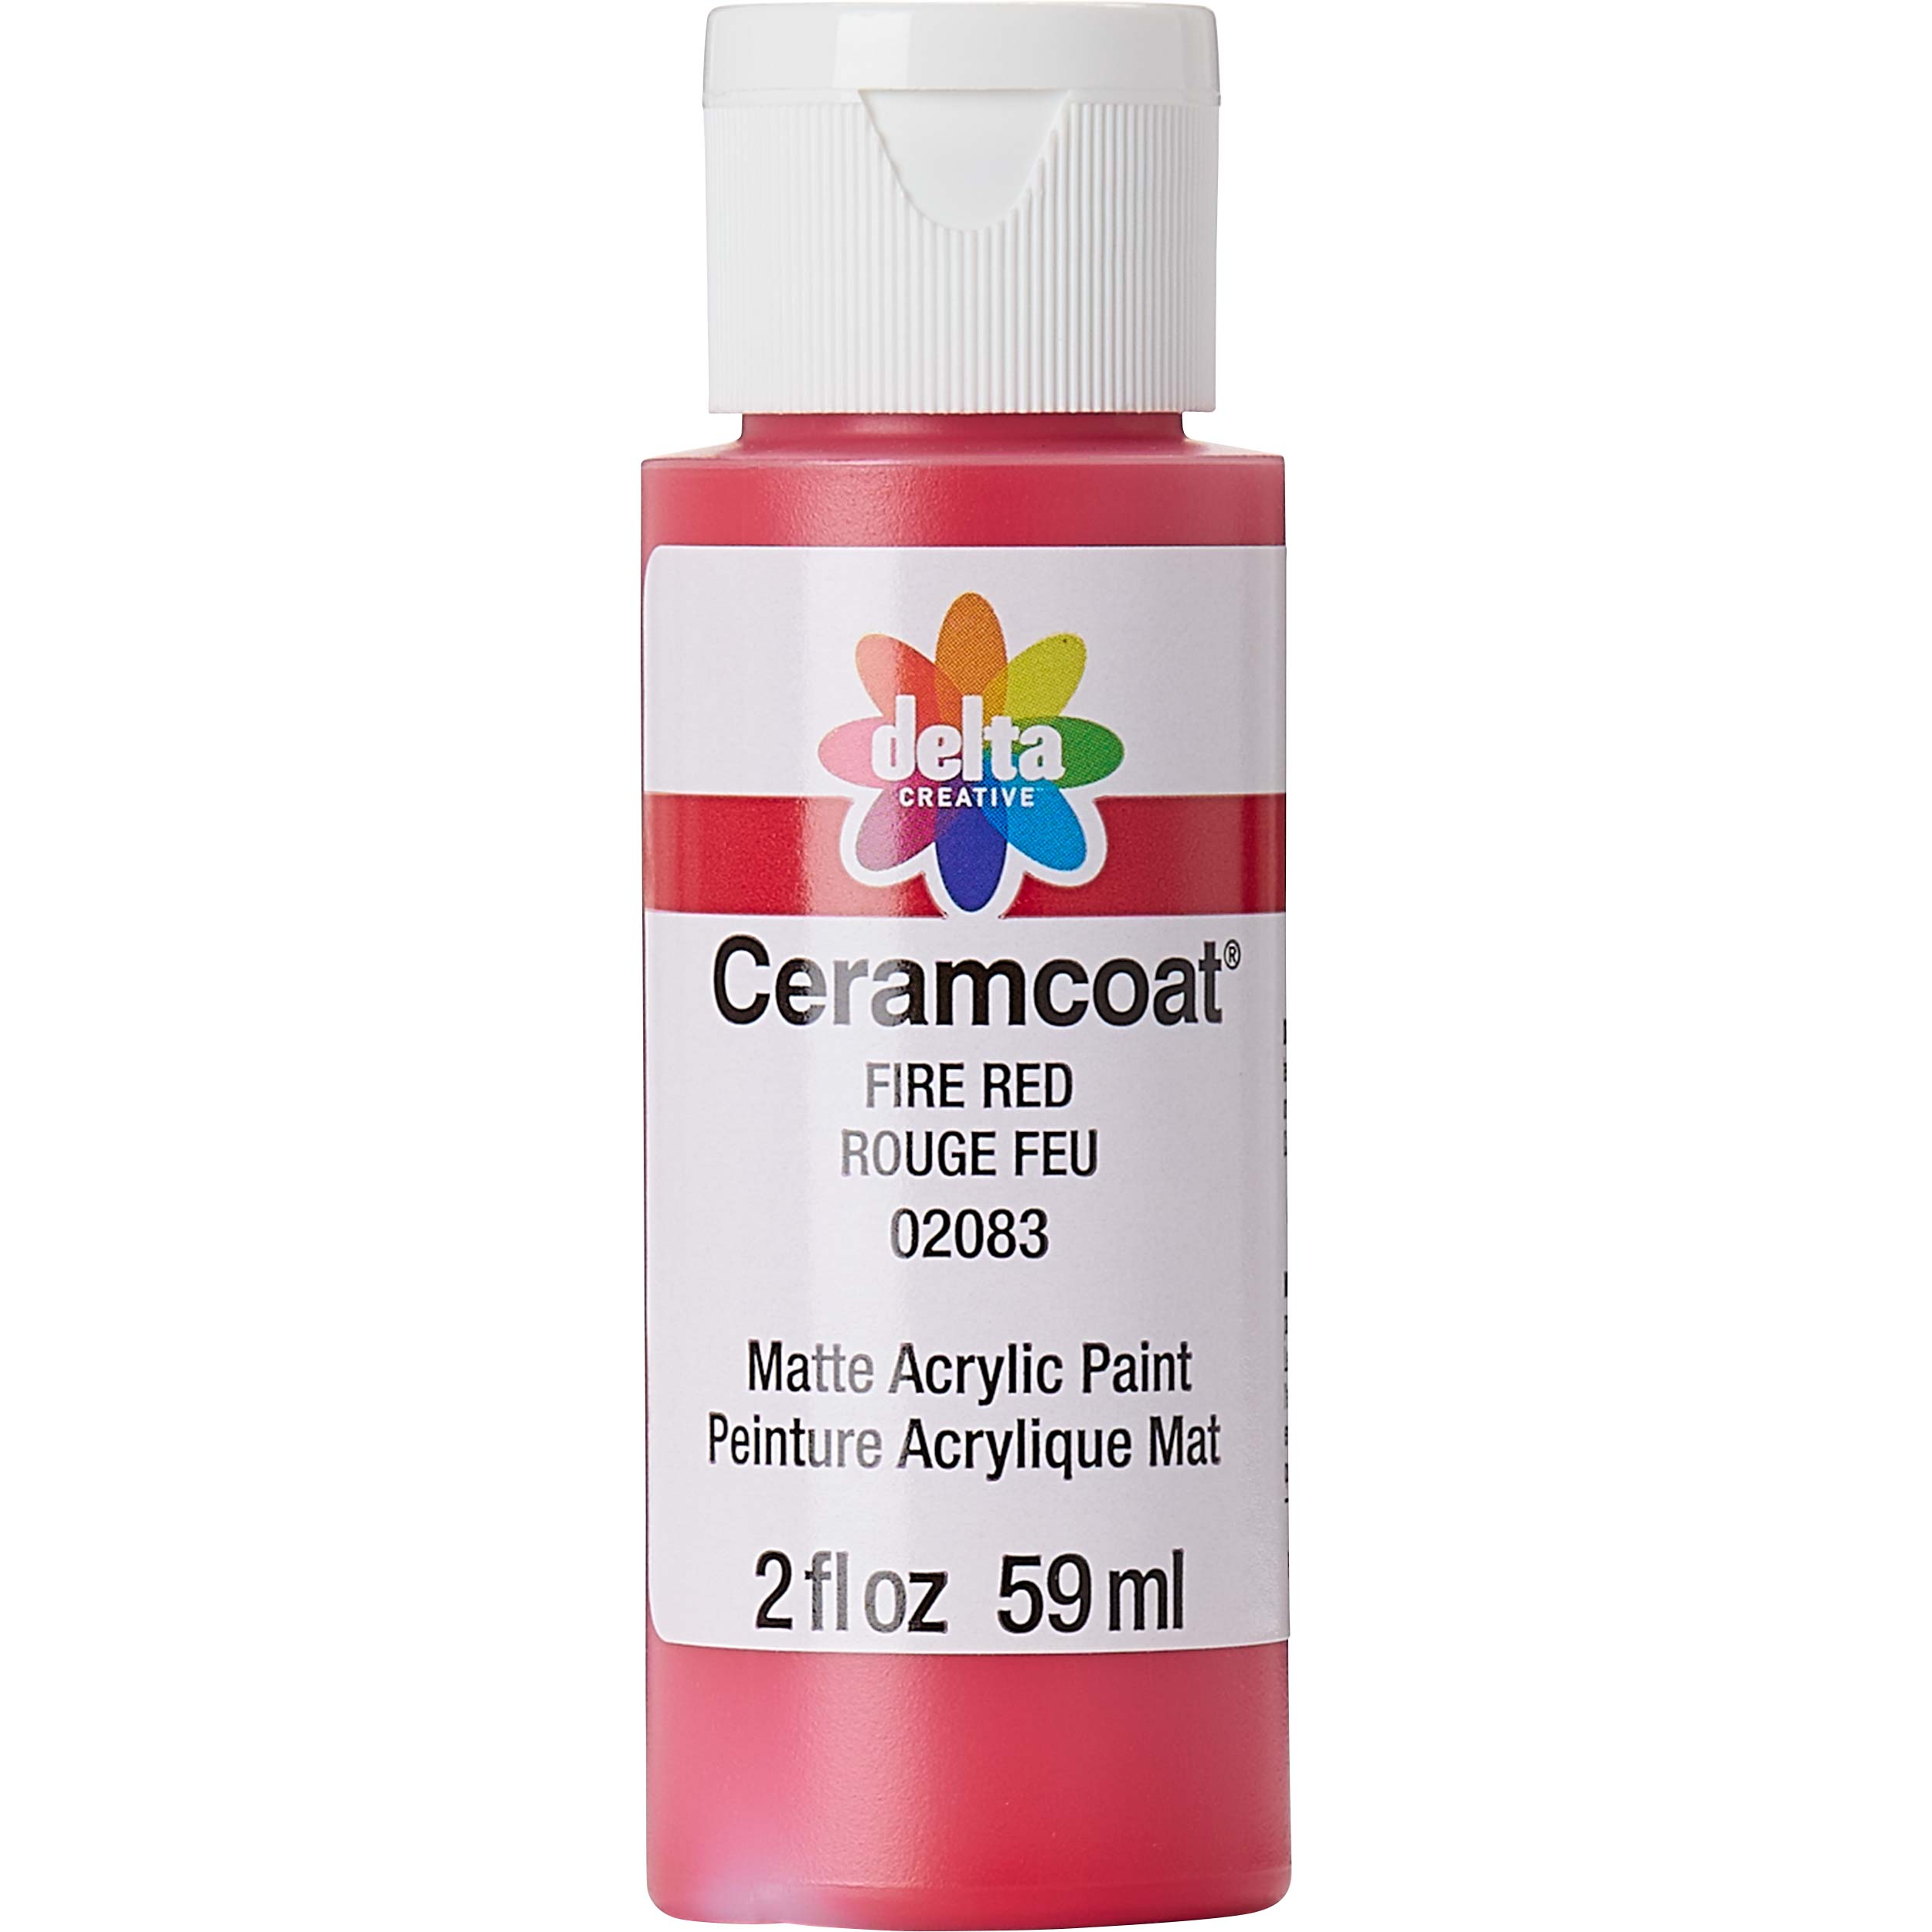 Delta Ceramcoat Acrylic Paint - Fire Red, 2 oz. - 020830202W